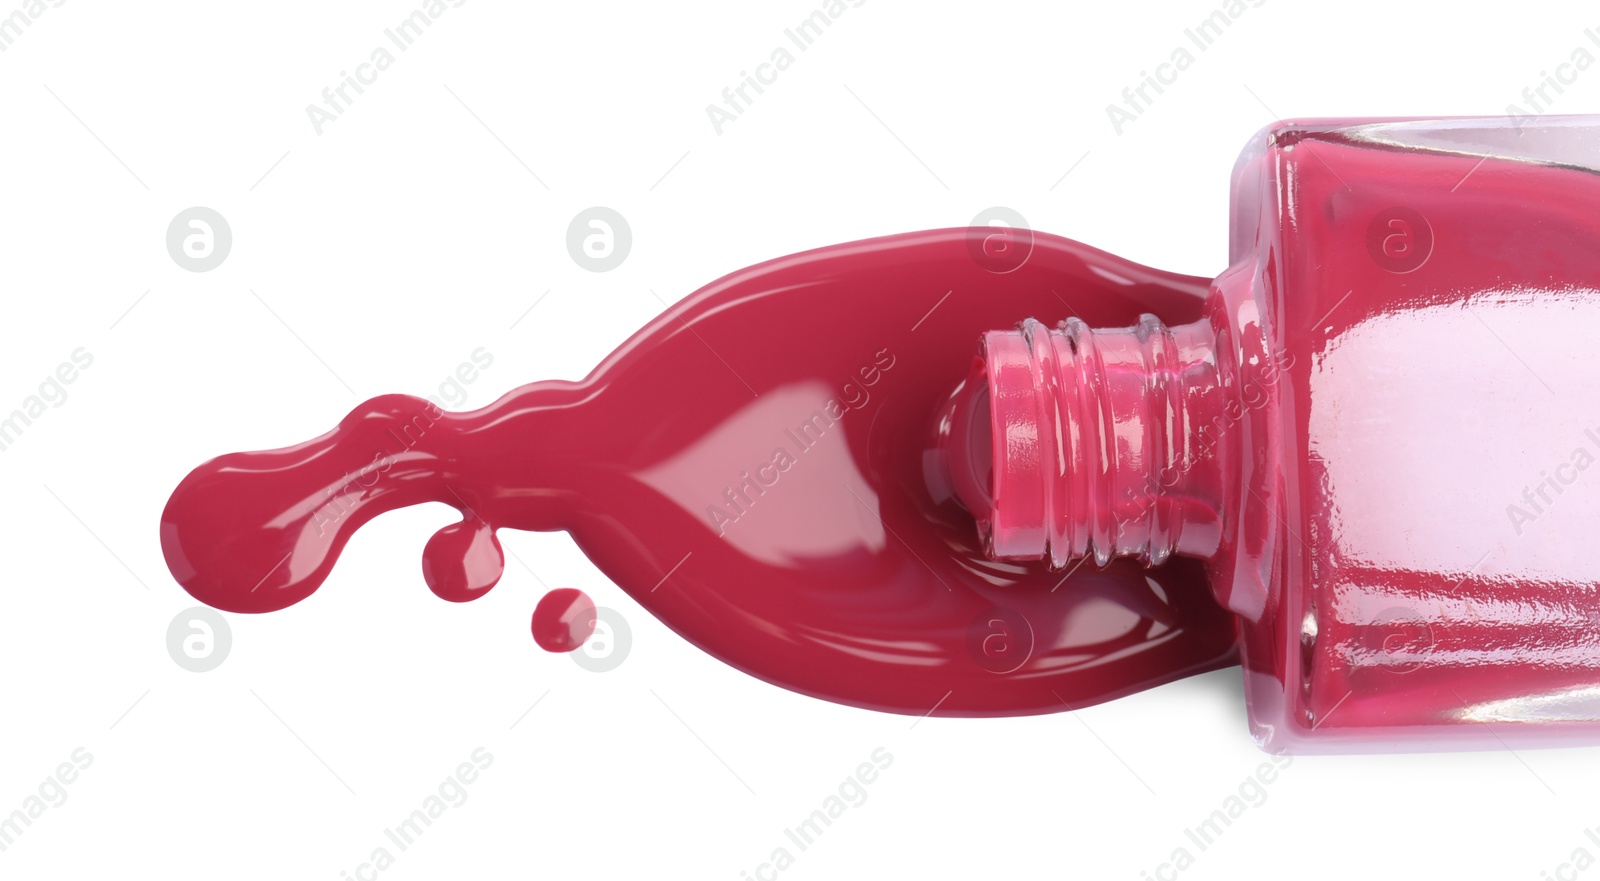 Photo of Bottle and spilled pink nail polish isolated on white, top view